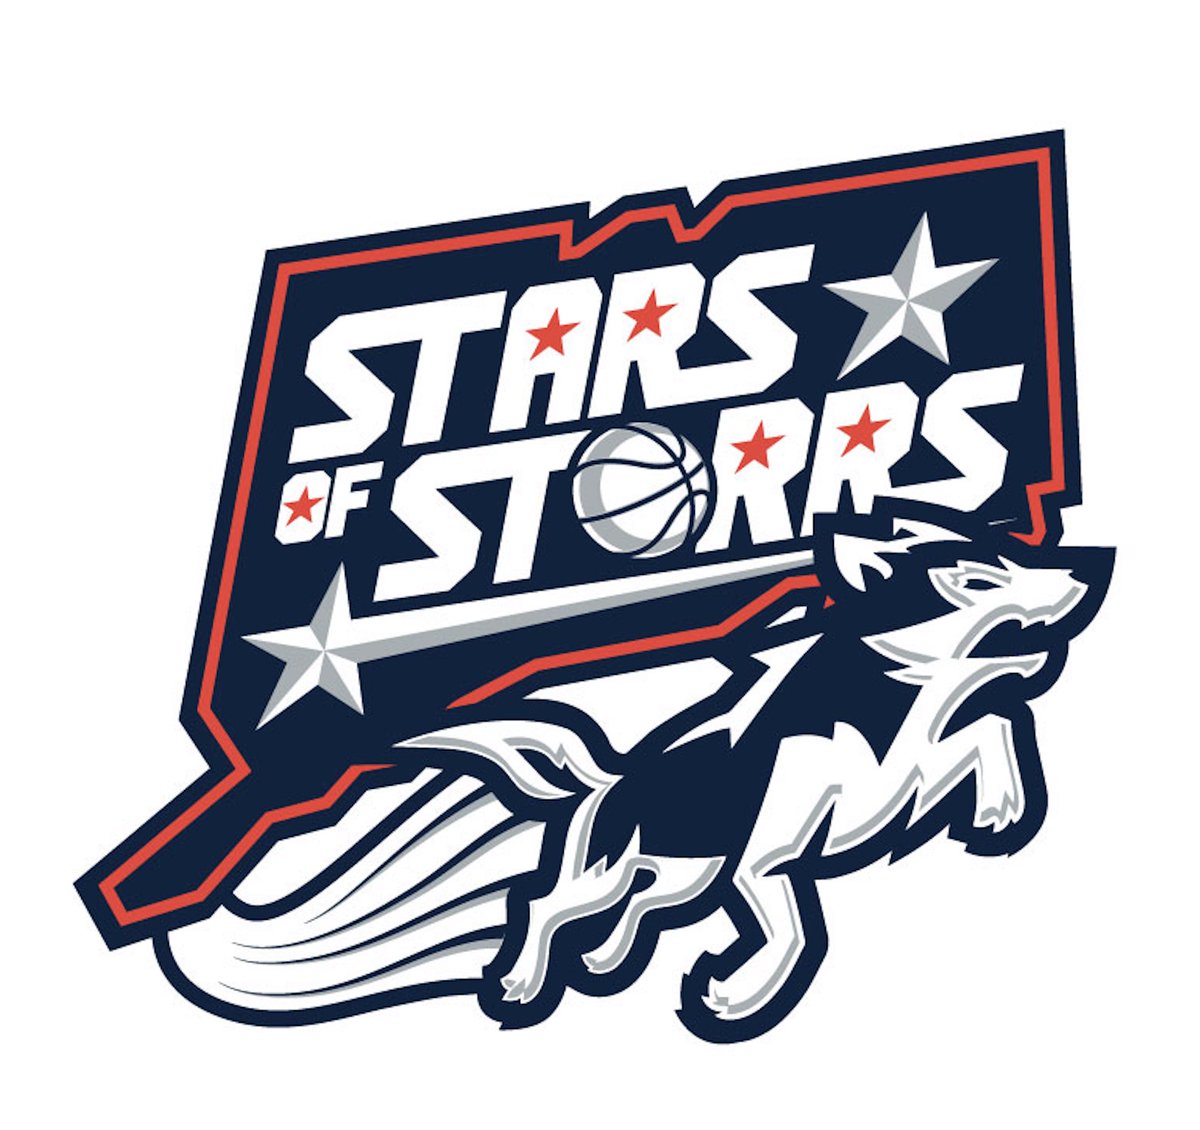 Stars of Storrs TBT $1,000,000 winning prize split: $100,000 to the D’Amelio Huskies NIL Collective. $100,000 to our coaching staff and $800,000 split evenly to the players. @starsofstorrs @thetournament @DamelioHuskies @huskiesalltime1 @Ryanboatright11 @D_Daniels2…